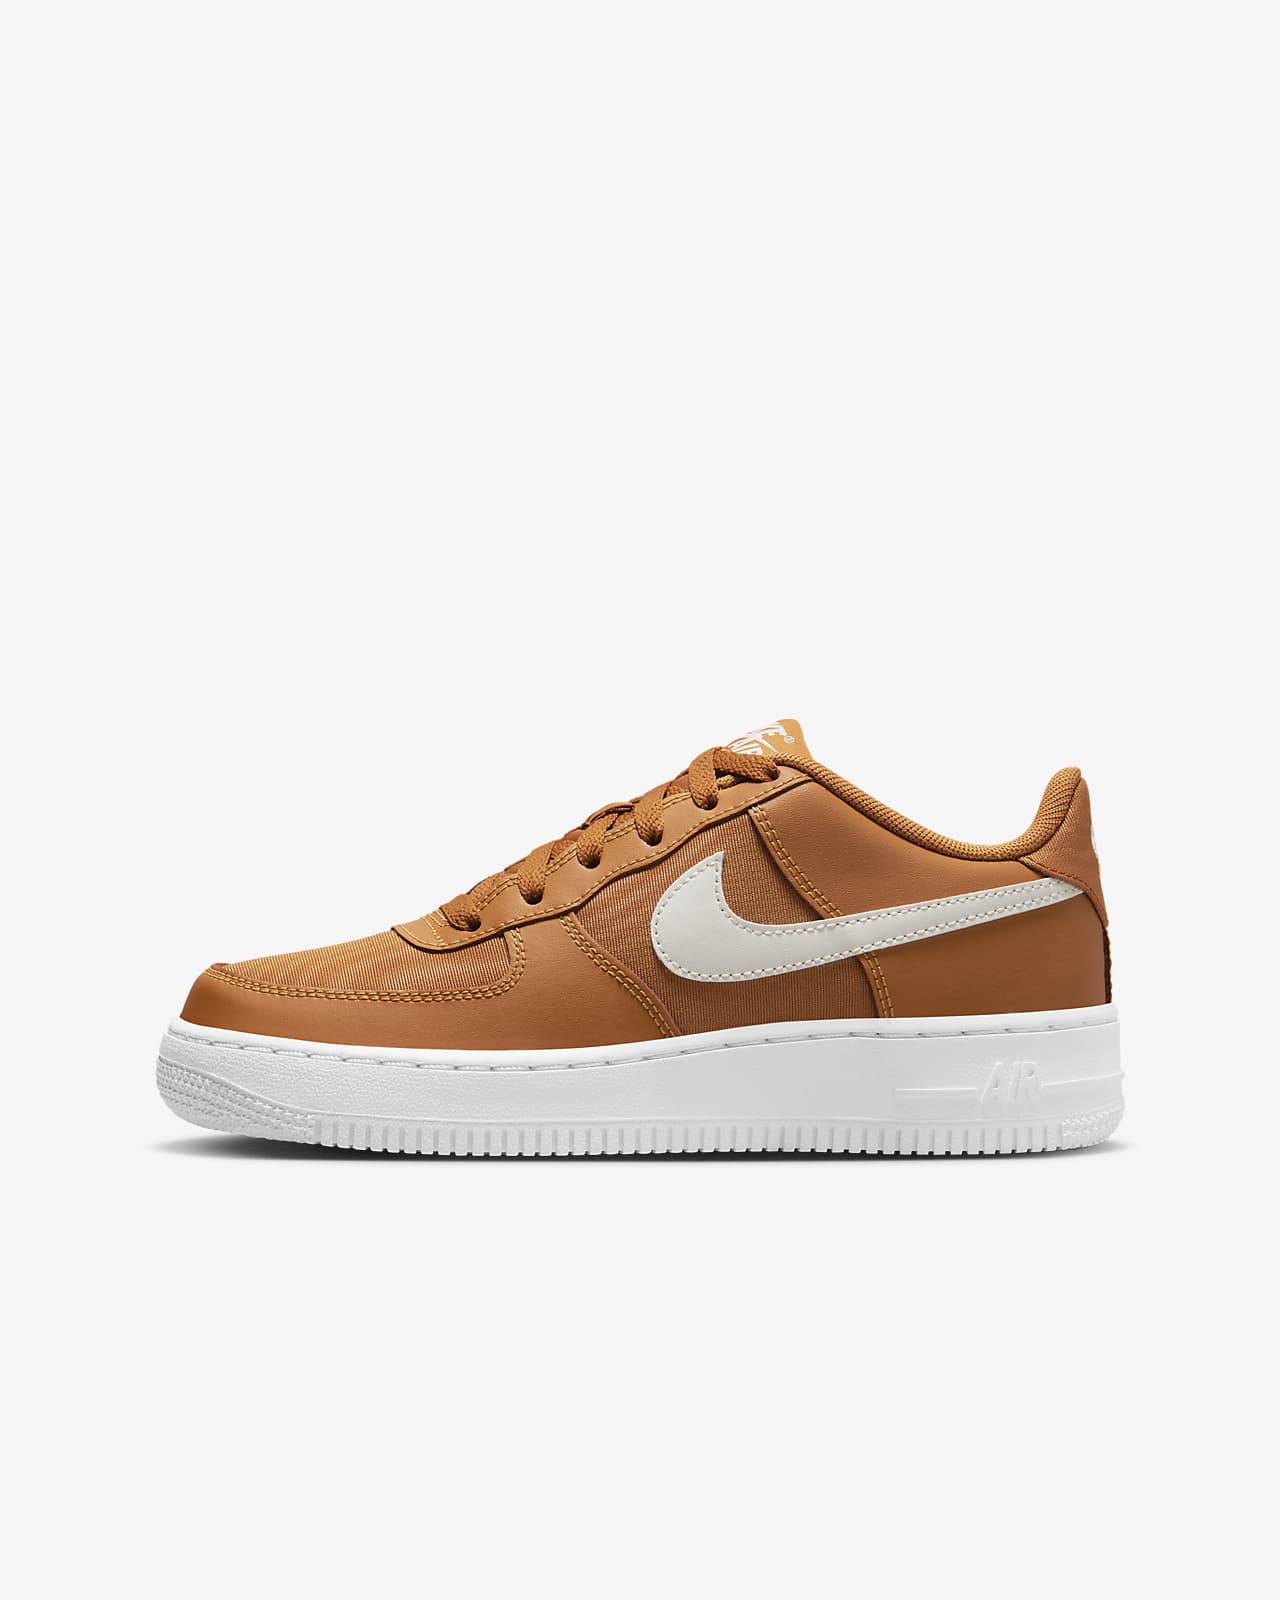 Nike Air Force 1 LV8 Little Kid's Shoes